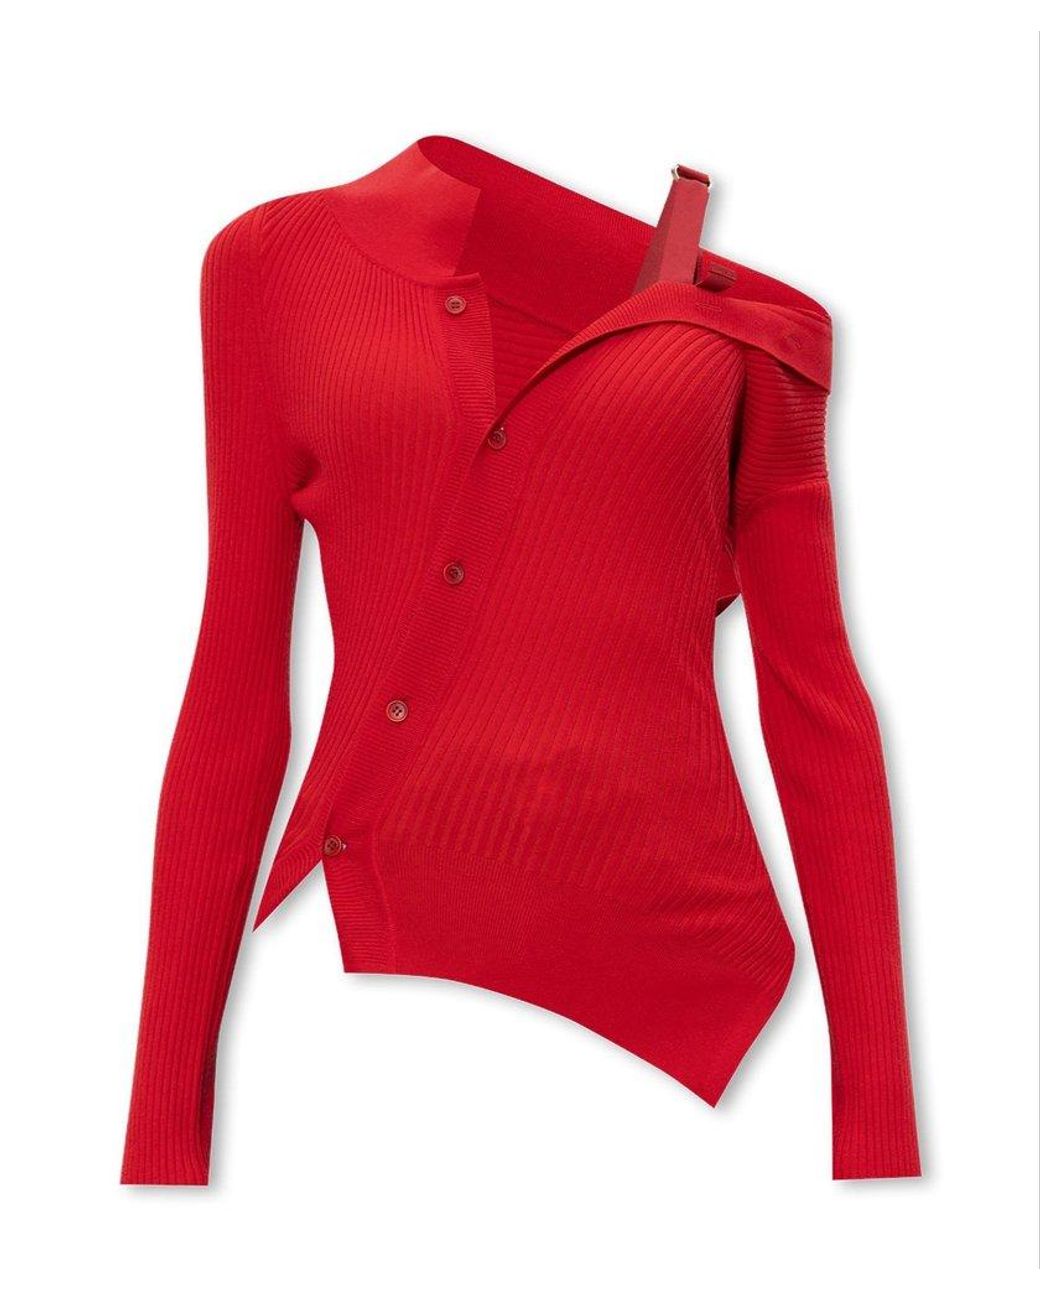 Jacquemus Colin Asymmetric Knit Top in Red | Lyst